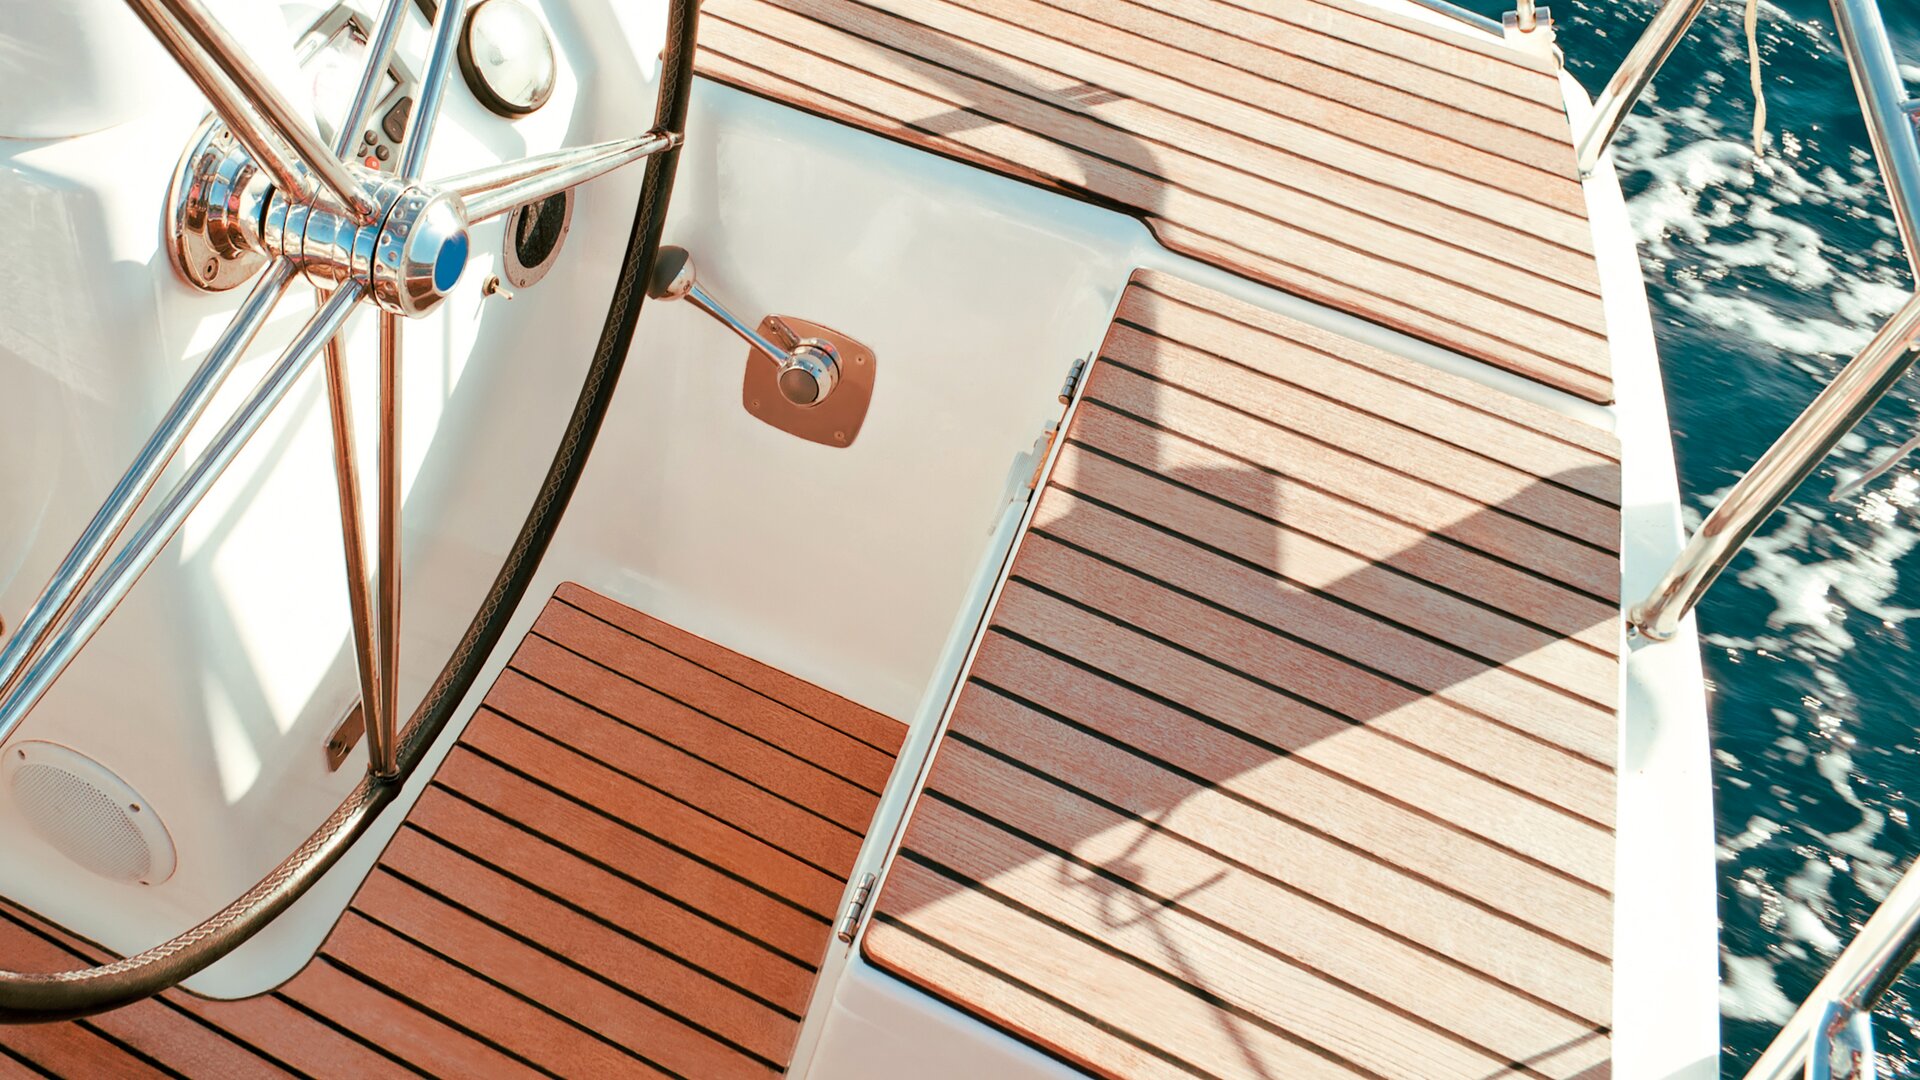 Close-up of a teak deck of a yacht with steering wheel.